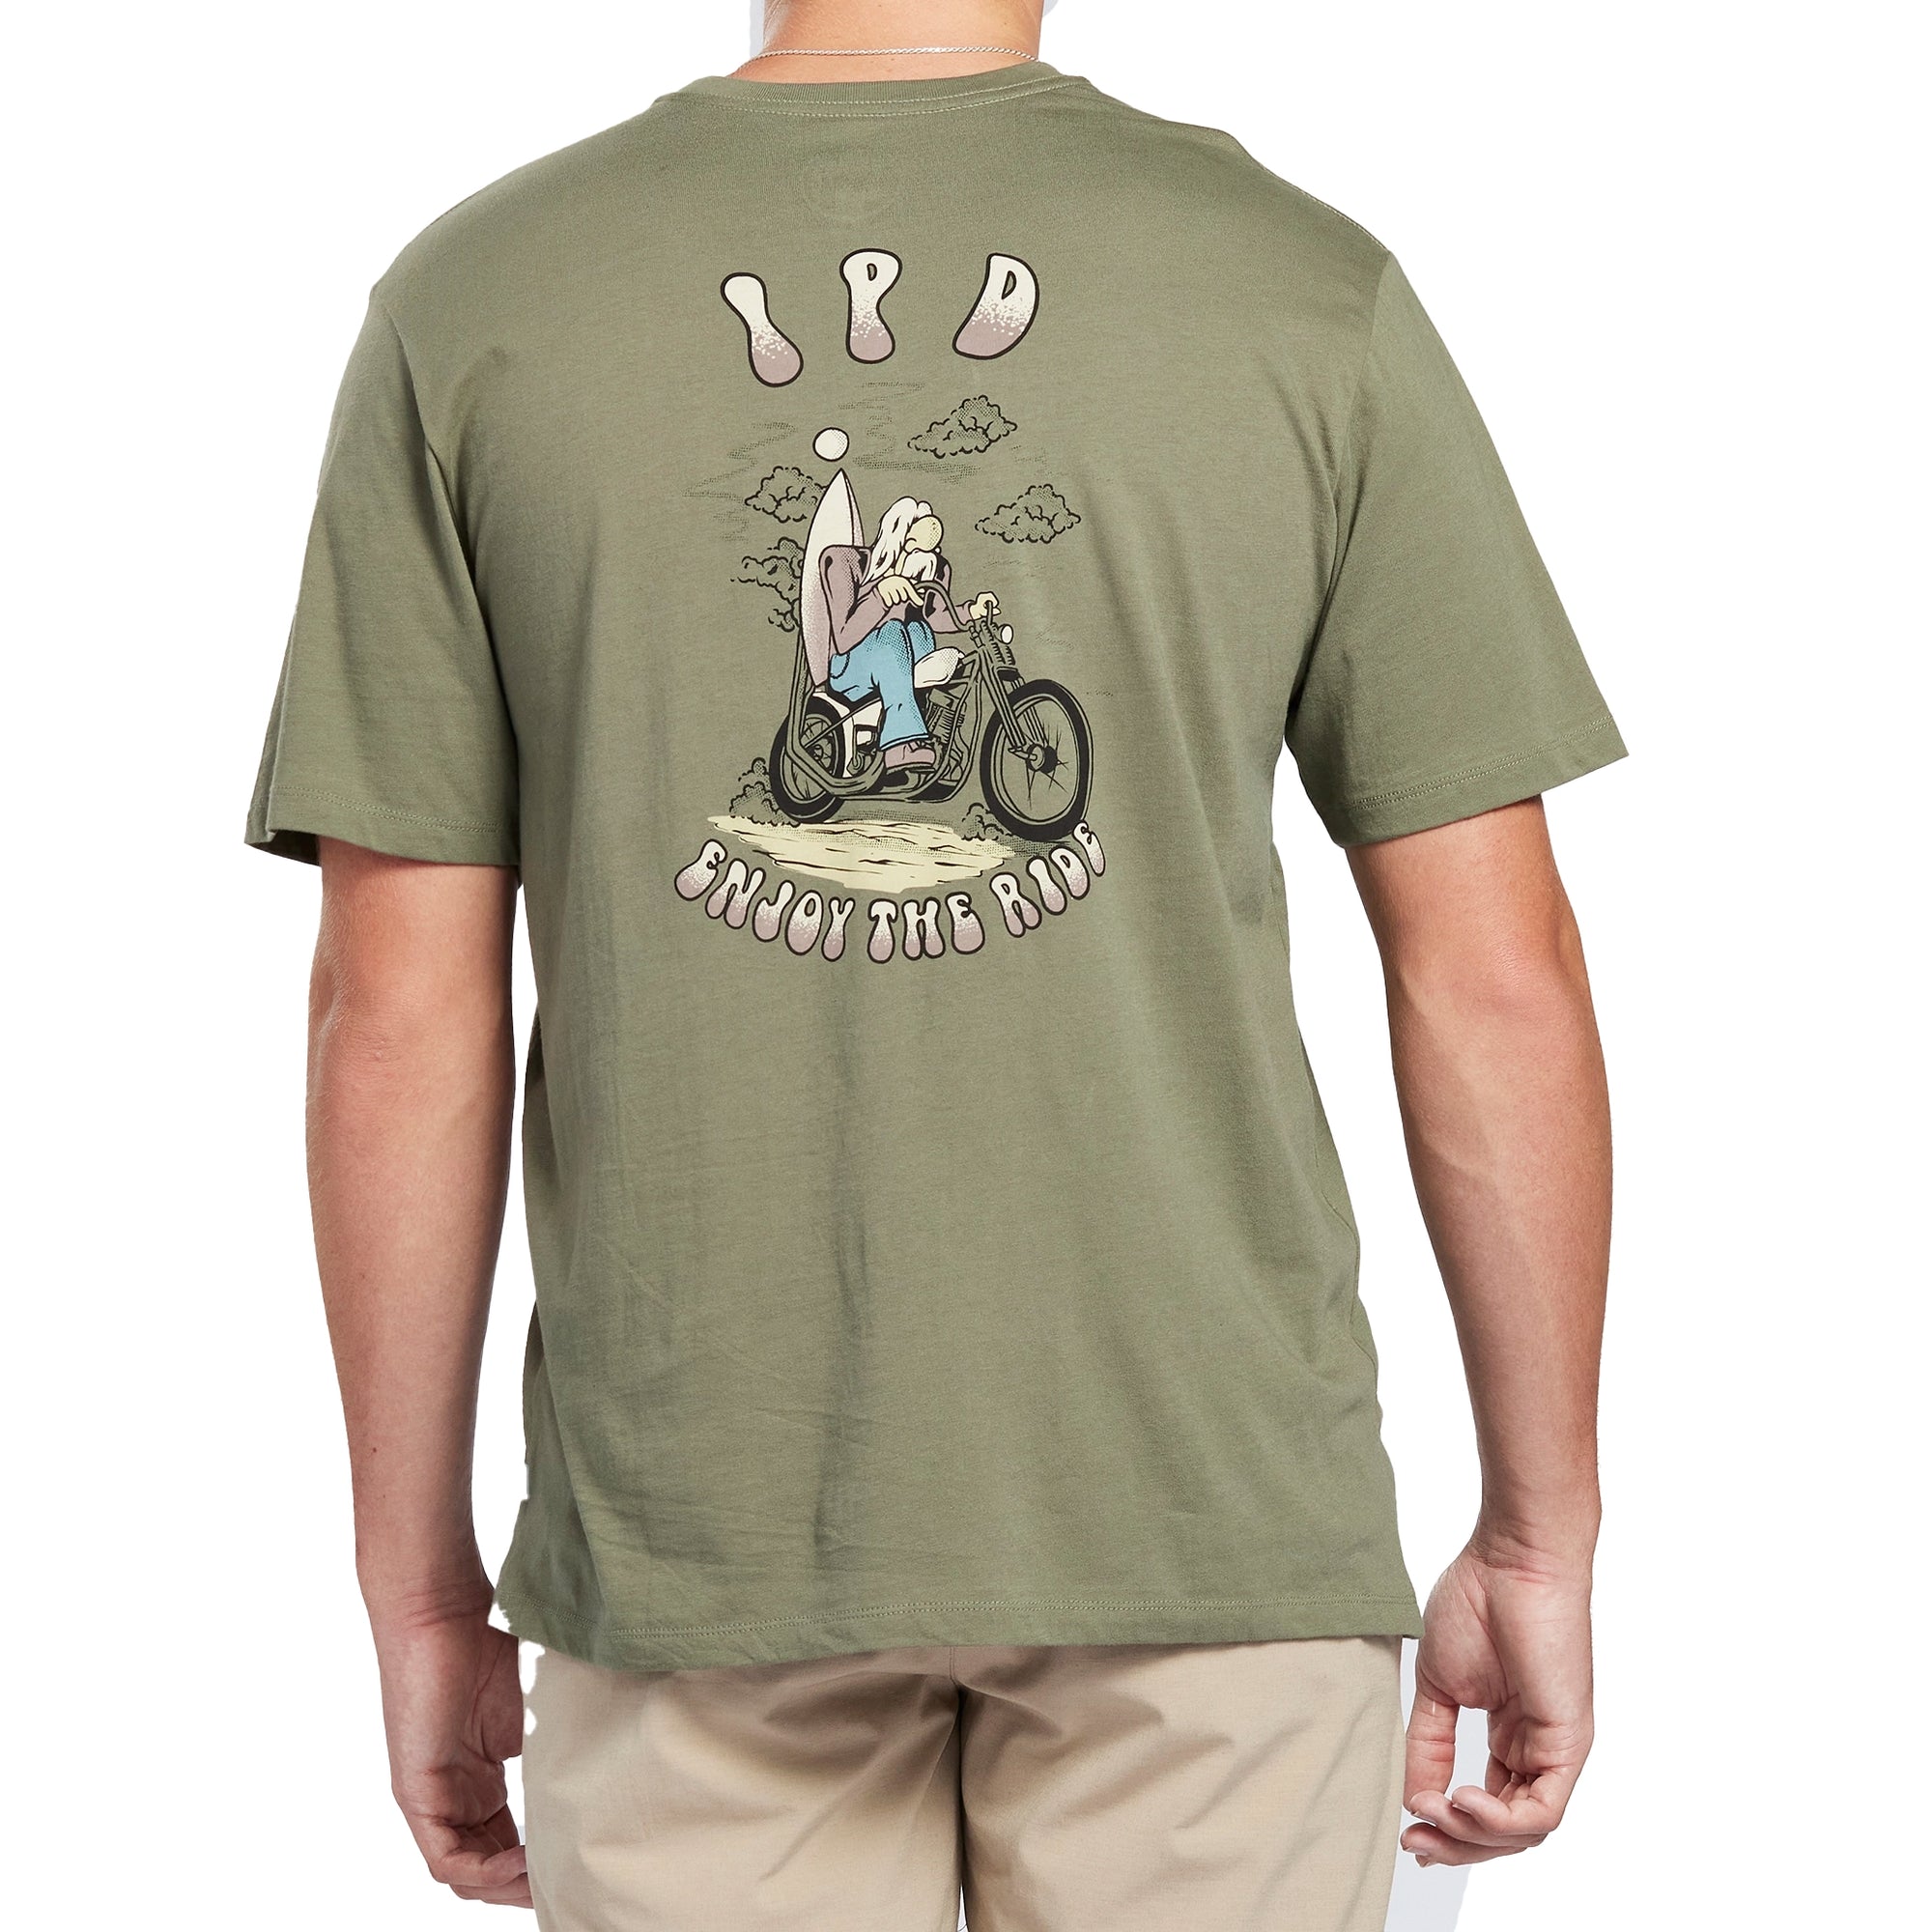 Olive tee with small I P D letters over the heart front